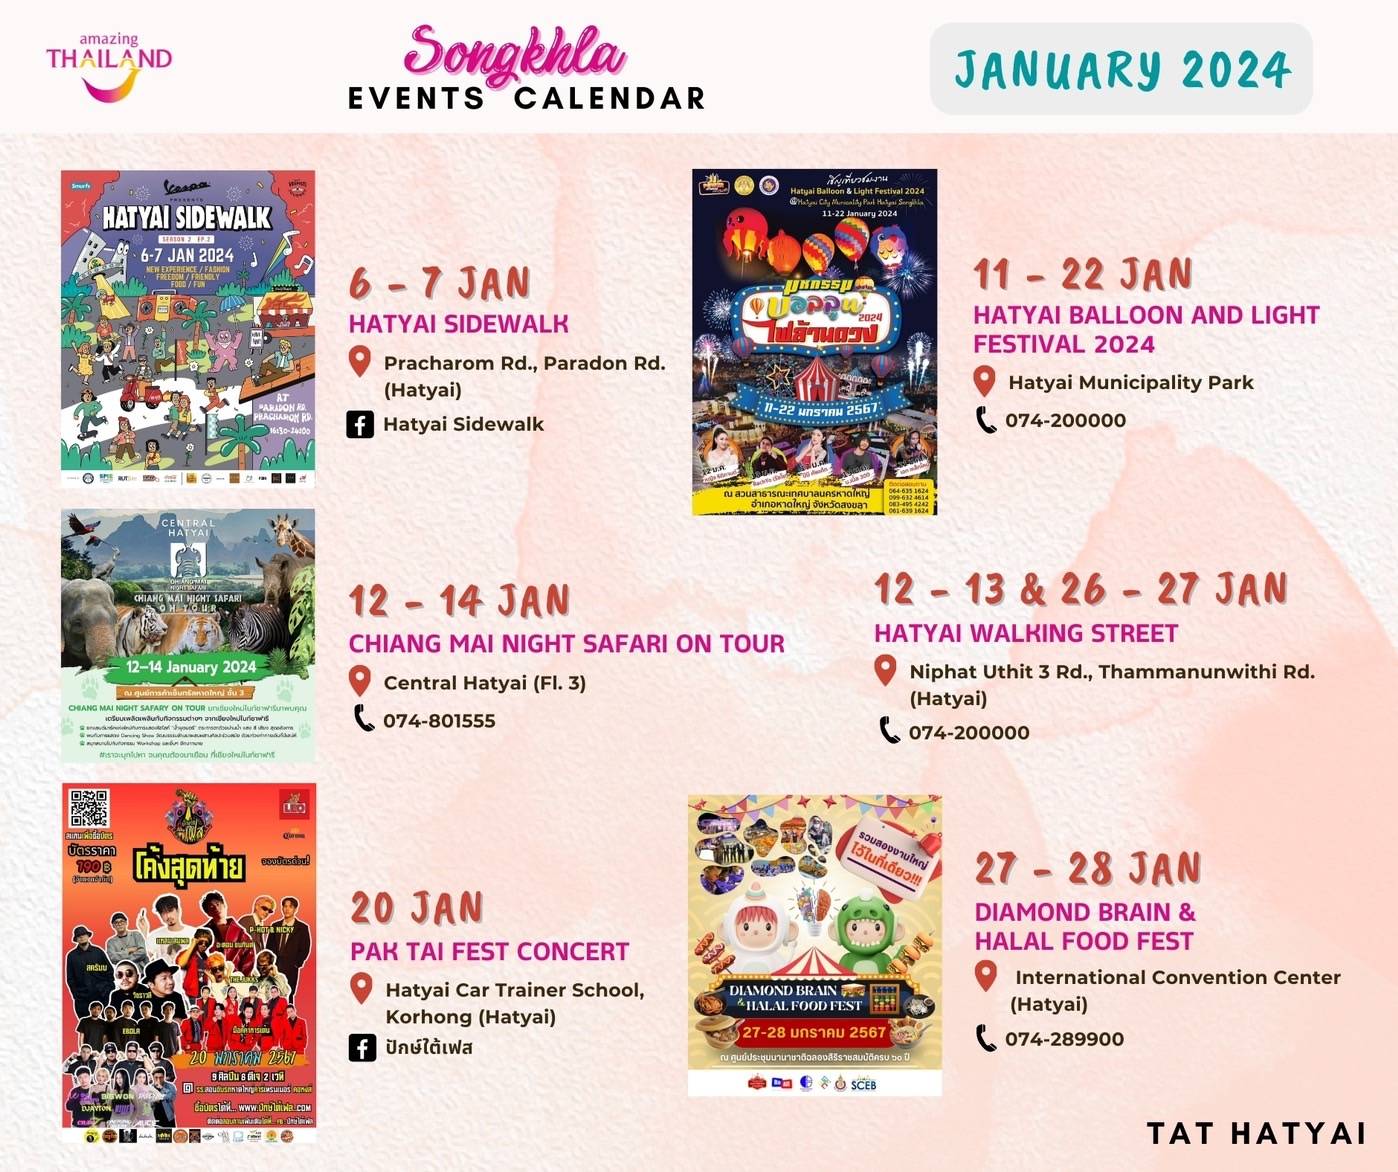 Six Events at Hatyai Thailand in January 2024